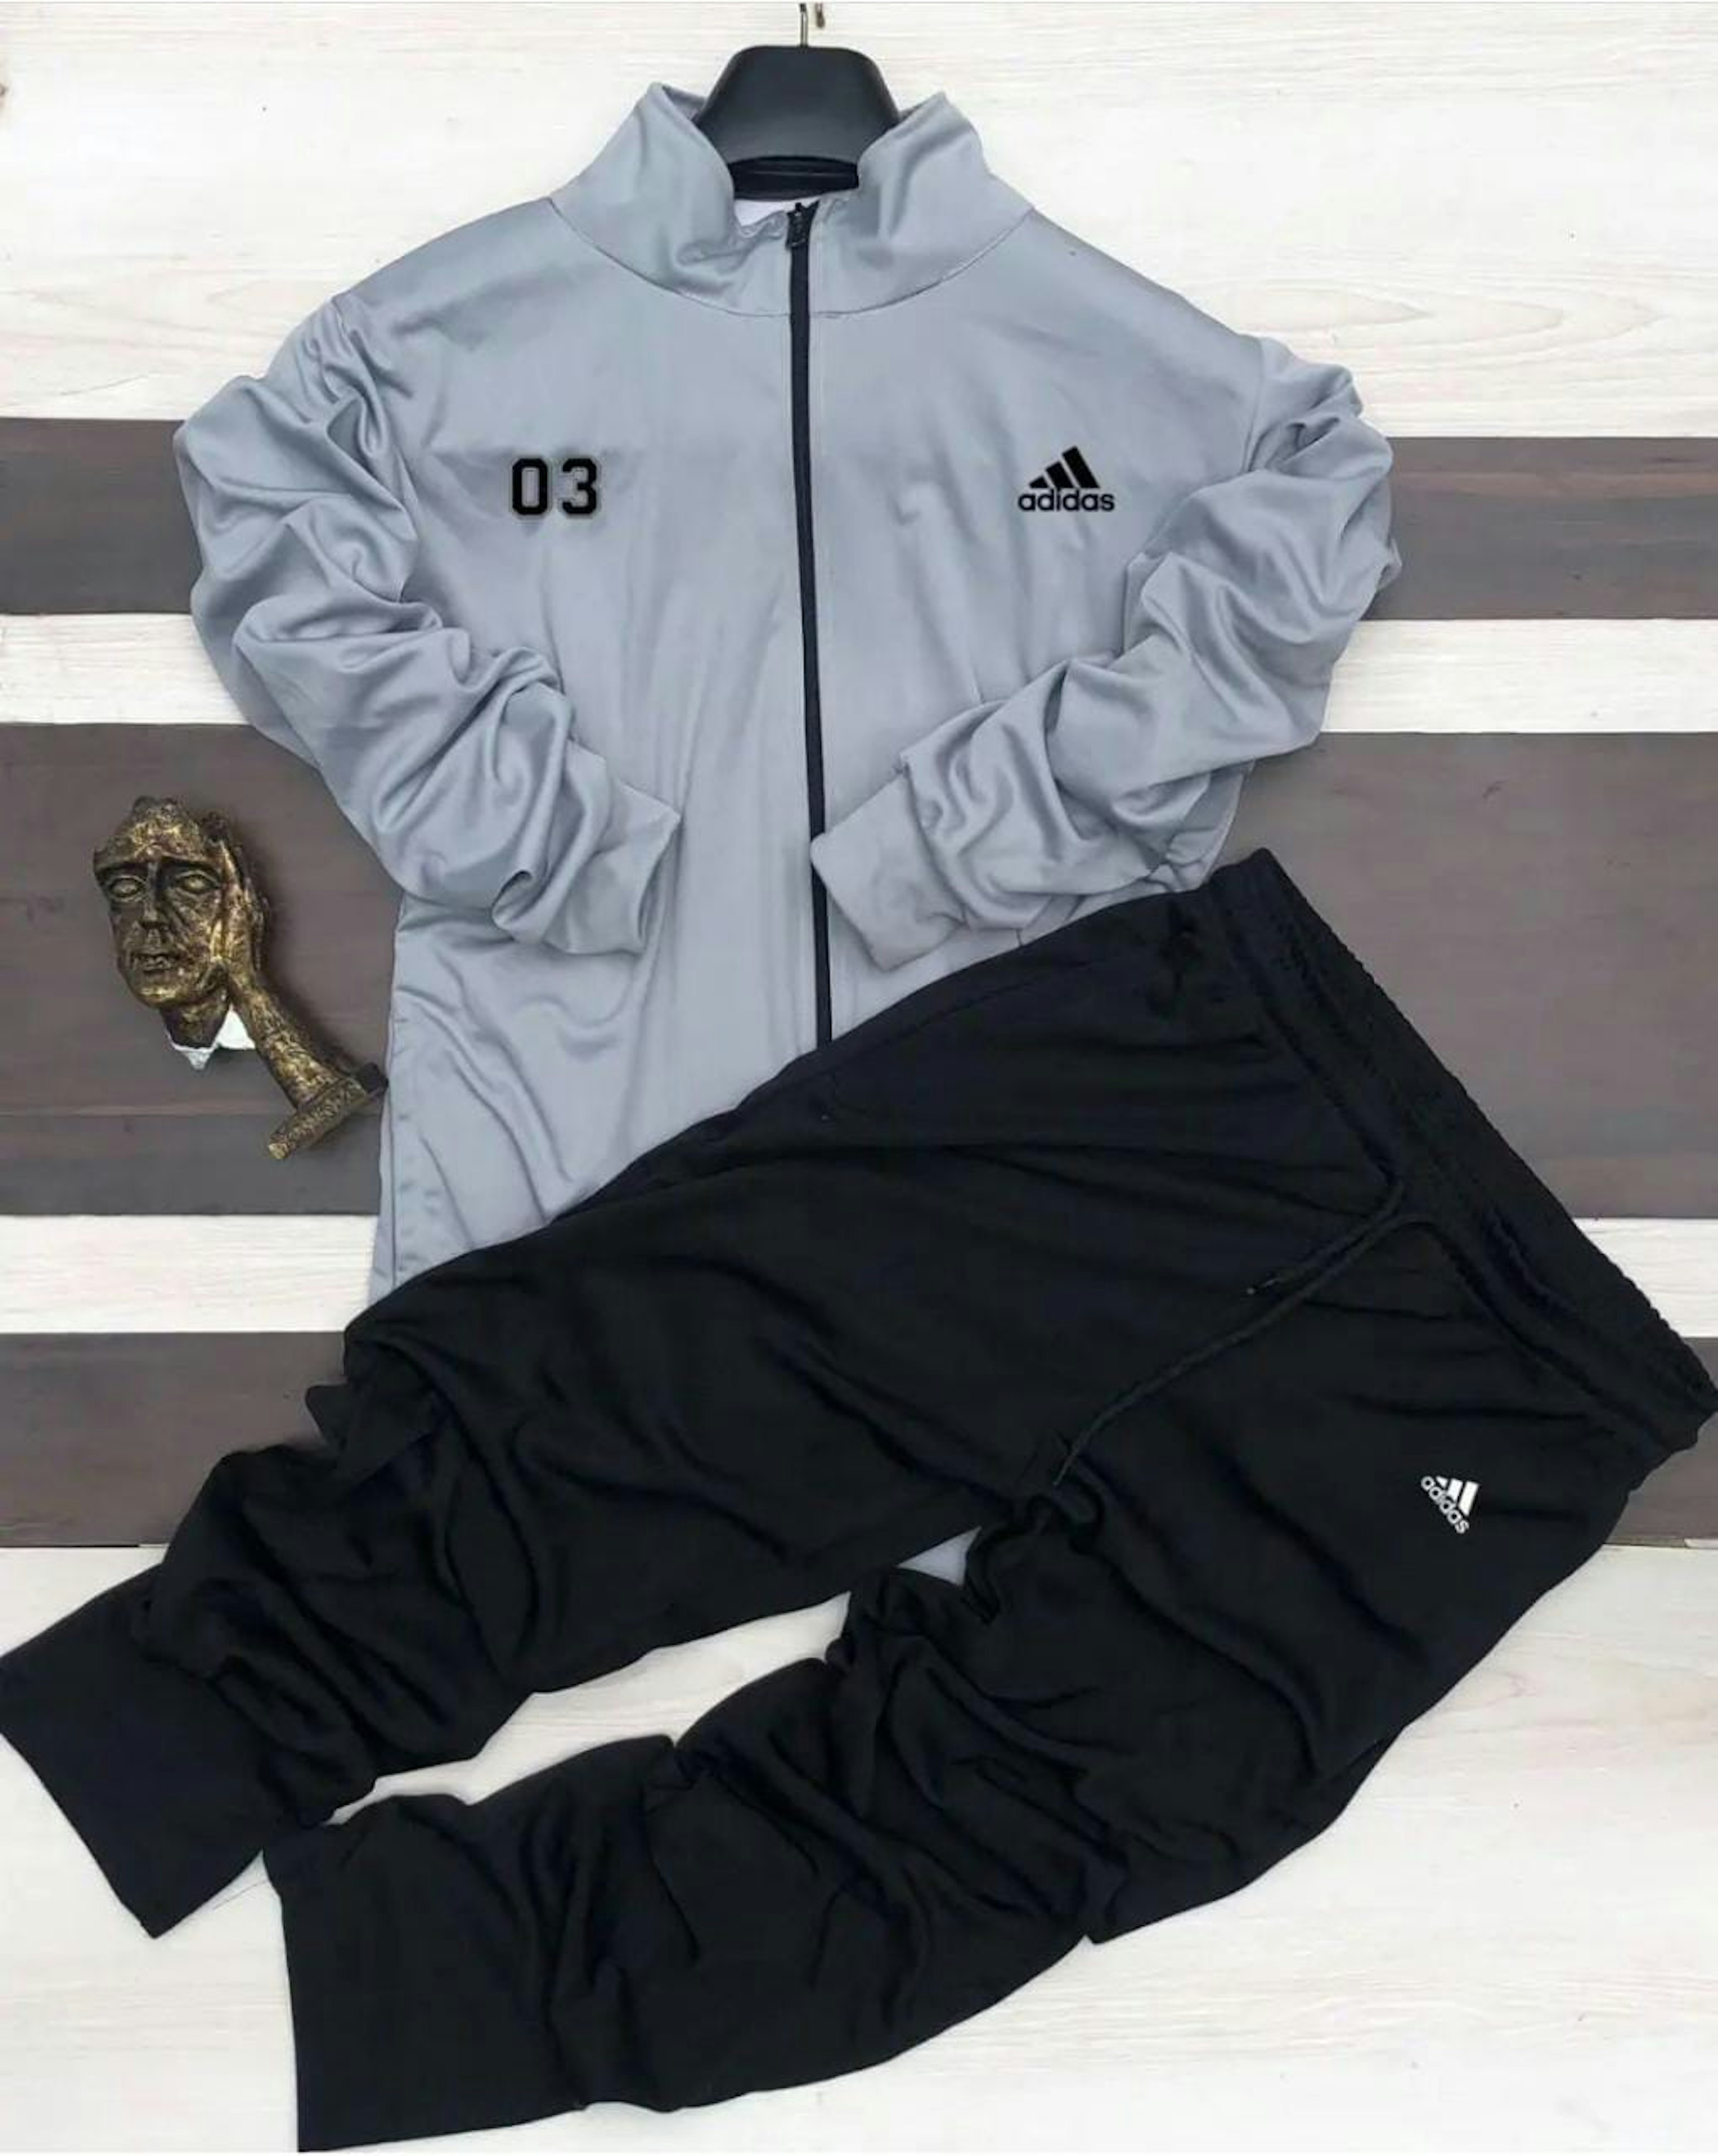 View - PUMA AND ADIDAS TRACK SUIT photos, PUMA AND ADIDAS TRACK SUIT available in Vadodara, make deal in 499